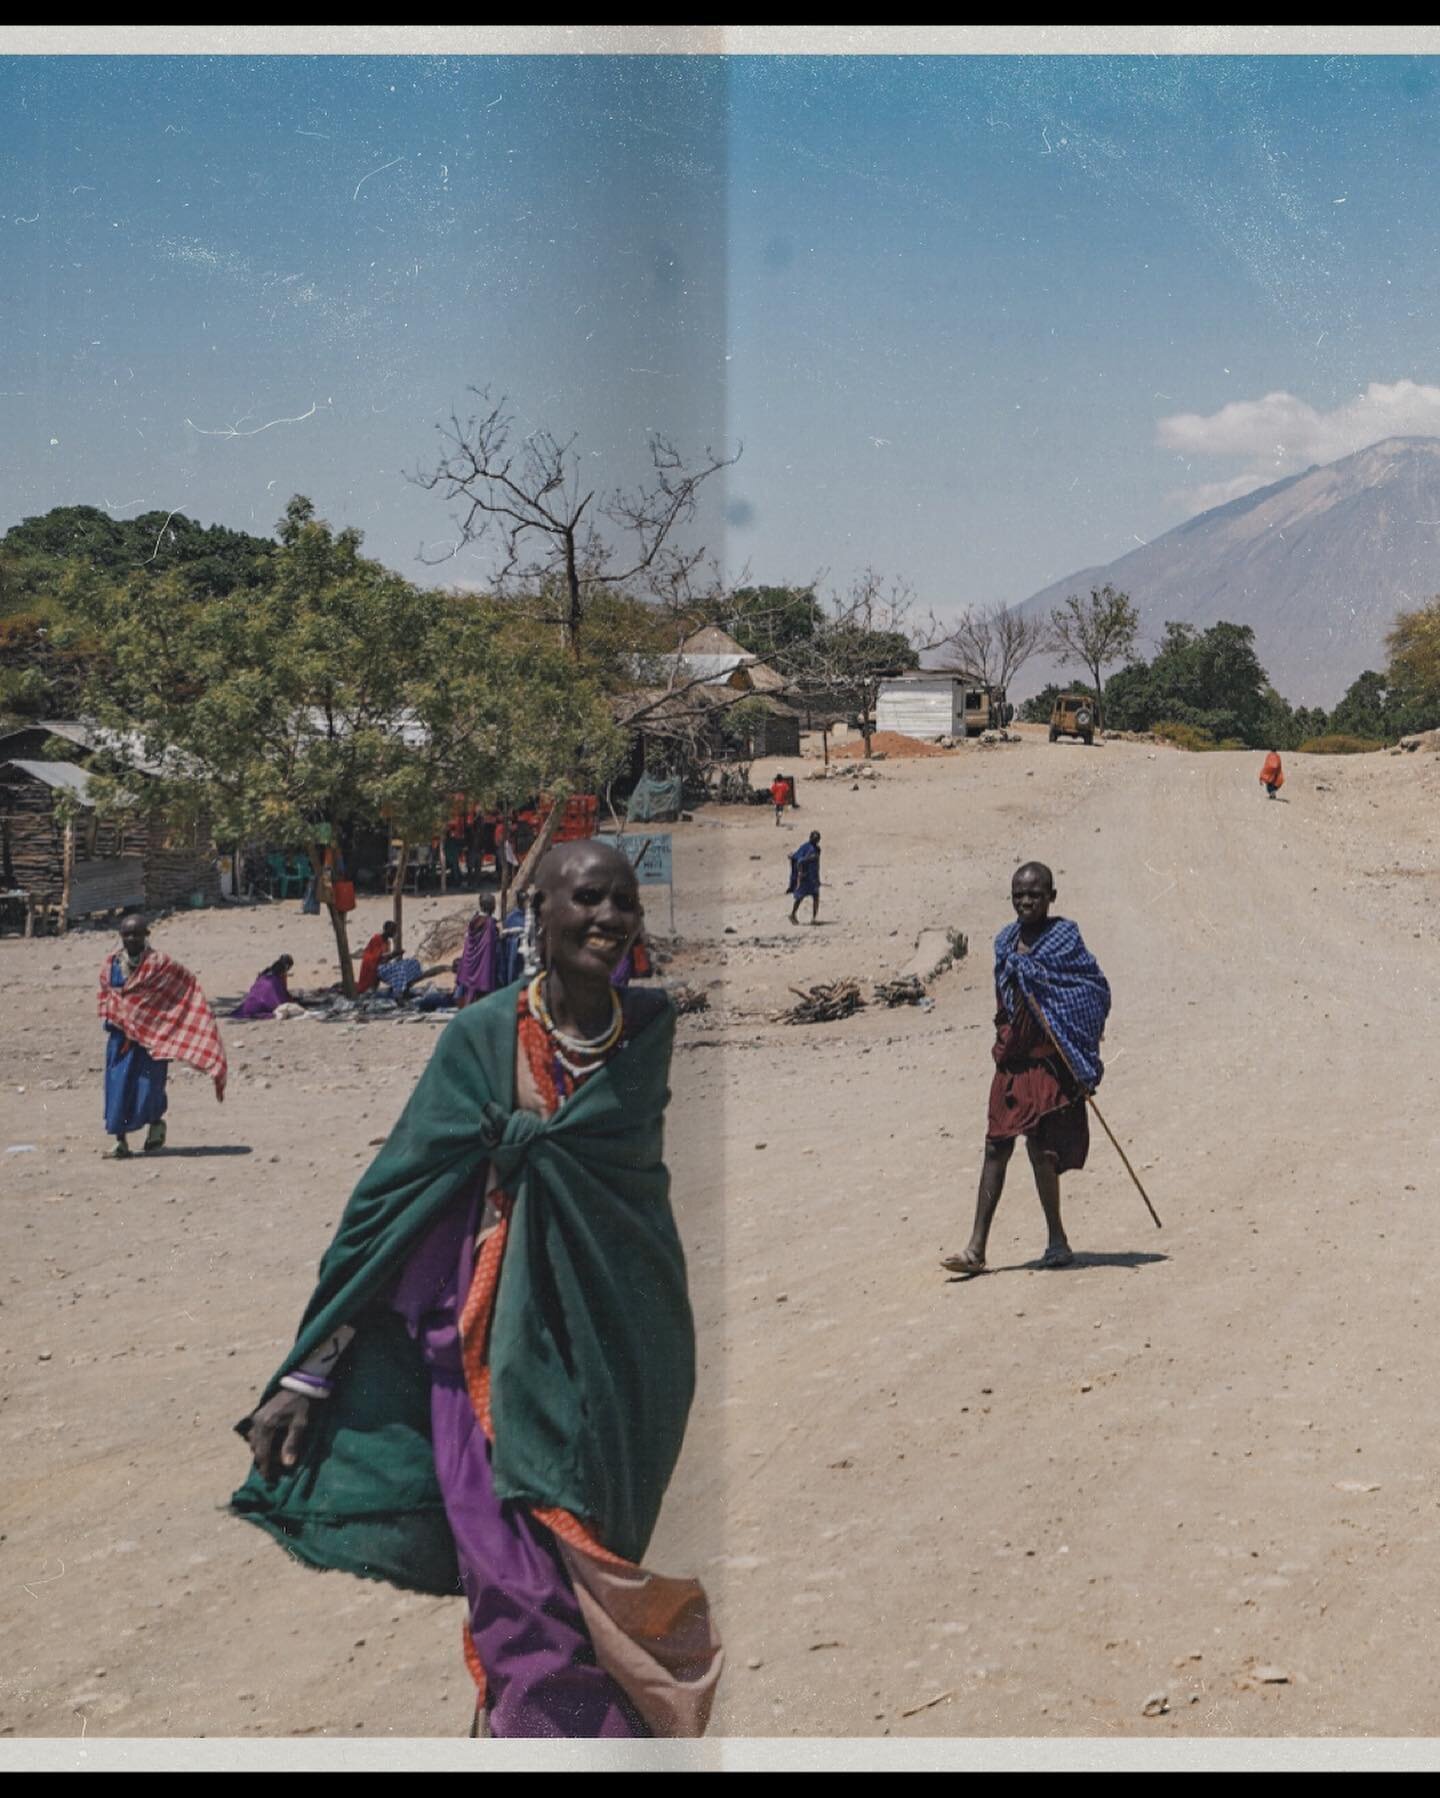 Ol Doinyo Lengai (Mountain of God) is a volcano in the East African Rift System. It&rsquo;s also a place that has shaped how we understand and connect with the world. 

#tanzania #natron #mountains #connection #rumi #development #home